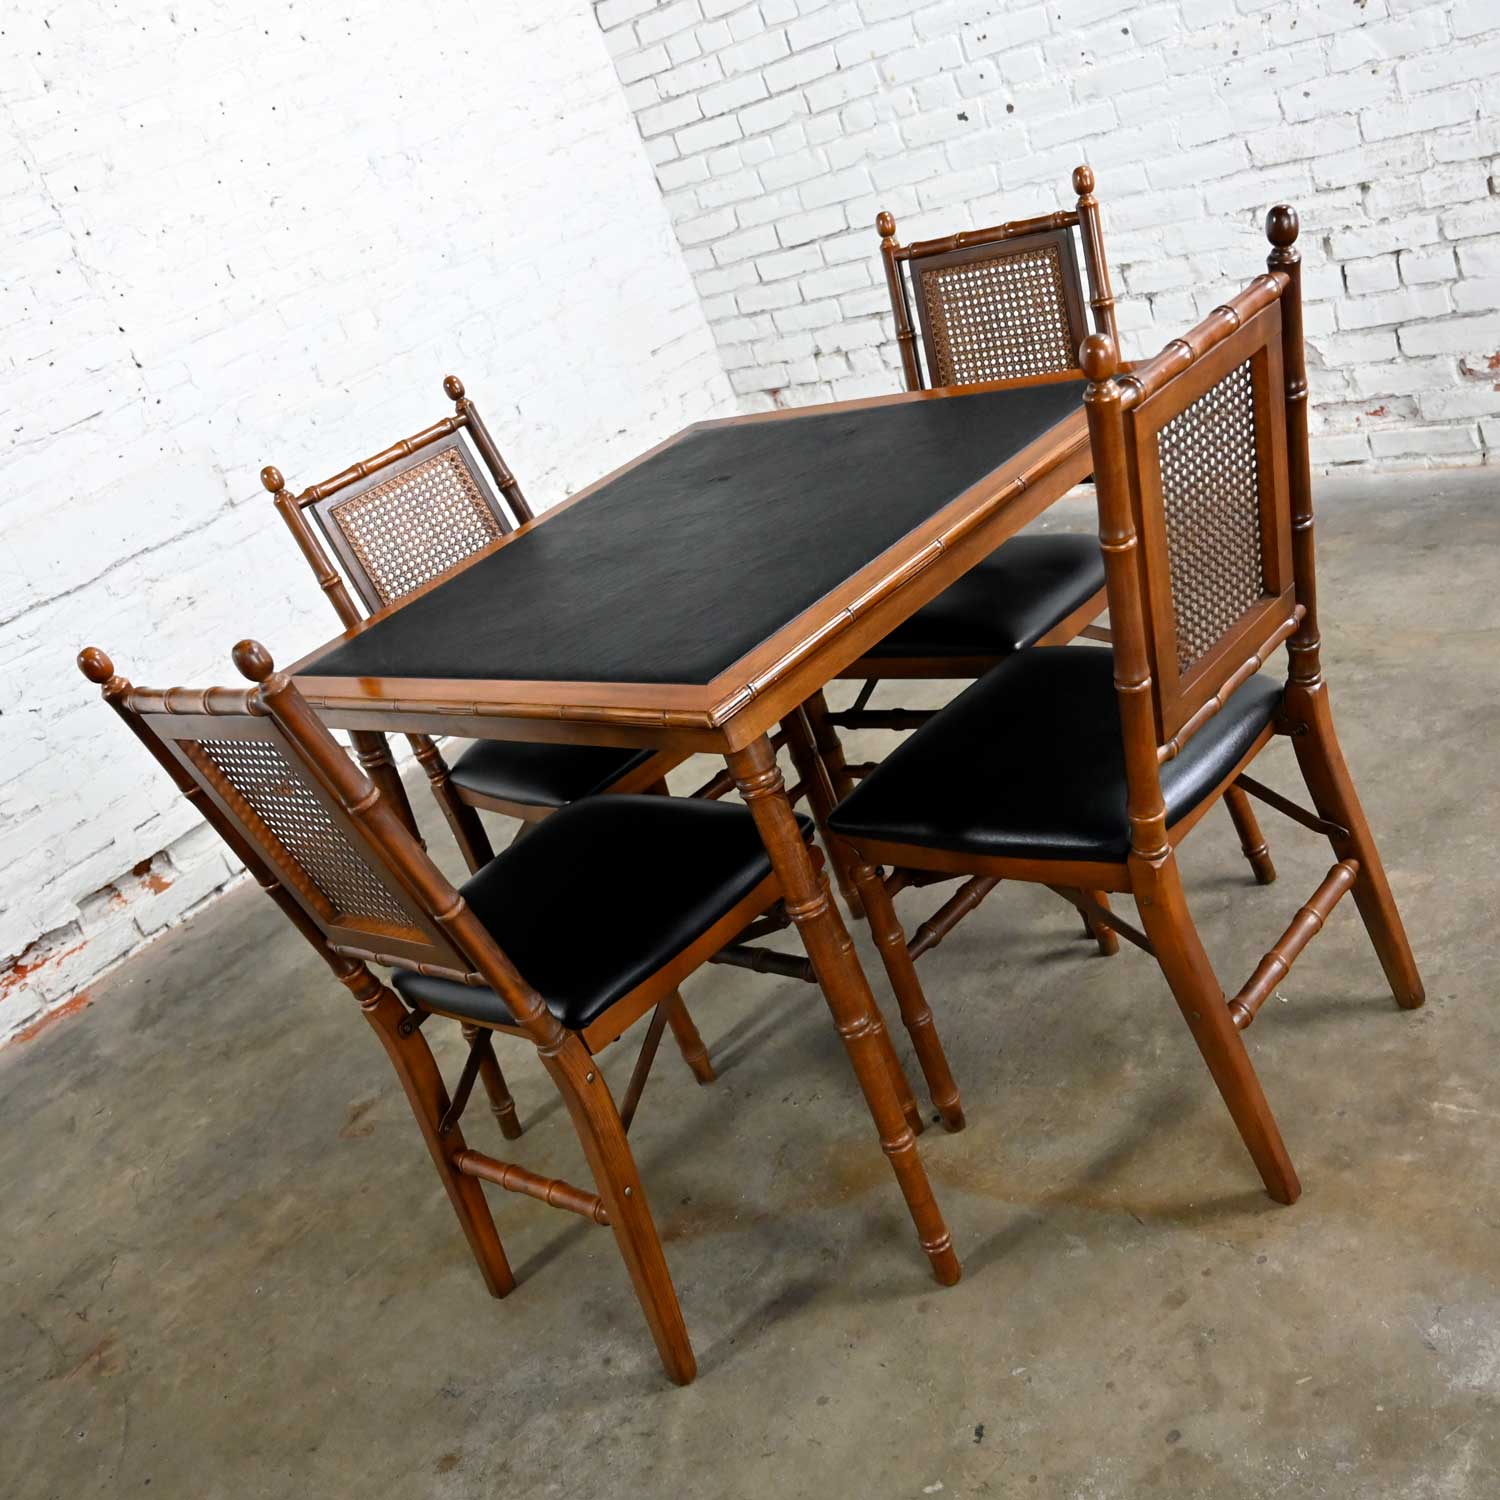 Vintage Campaign Style Faux Bamboo Folding Table & 4 Chairs Faux Leather Top and Seat Cushions